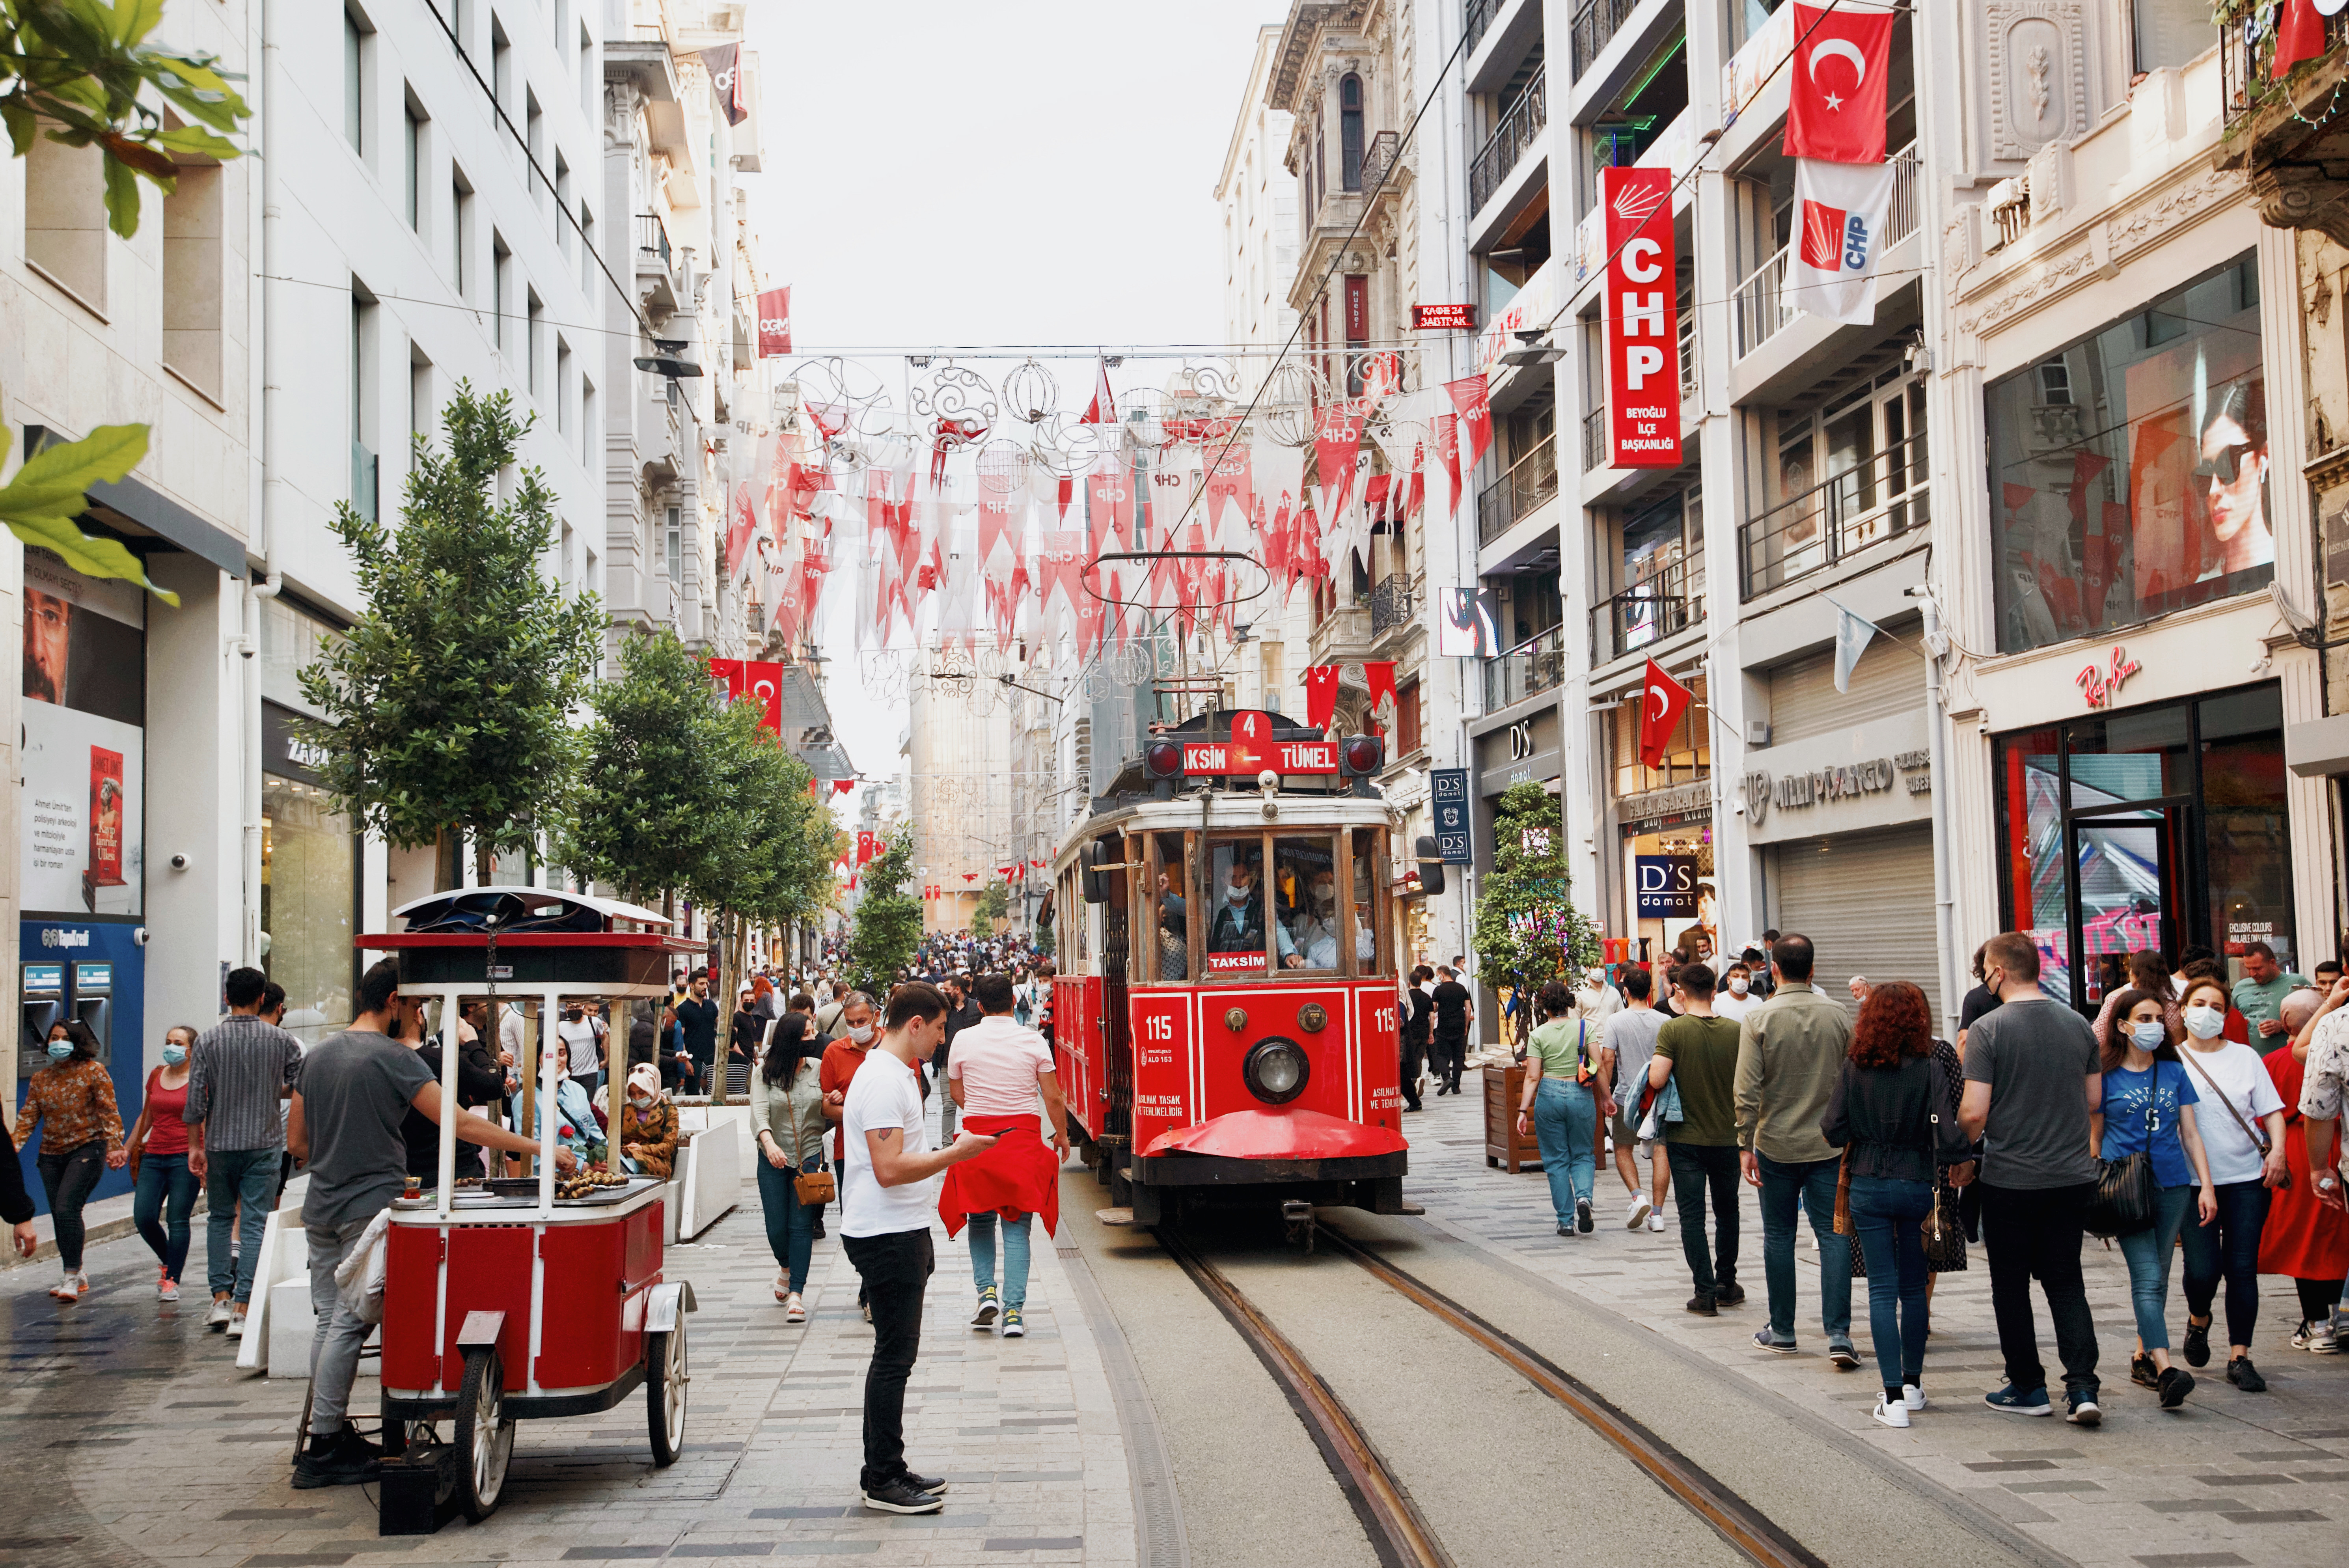 Istanbul Travel Guide: Best Things to Do, Eat and See // The Lama List // TheLamaList.com // Photo by @travelinglamas